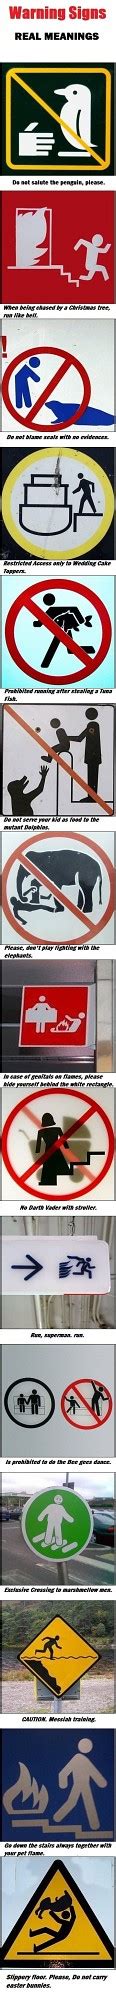 warning signs  real meanings image humor satire parody mod db